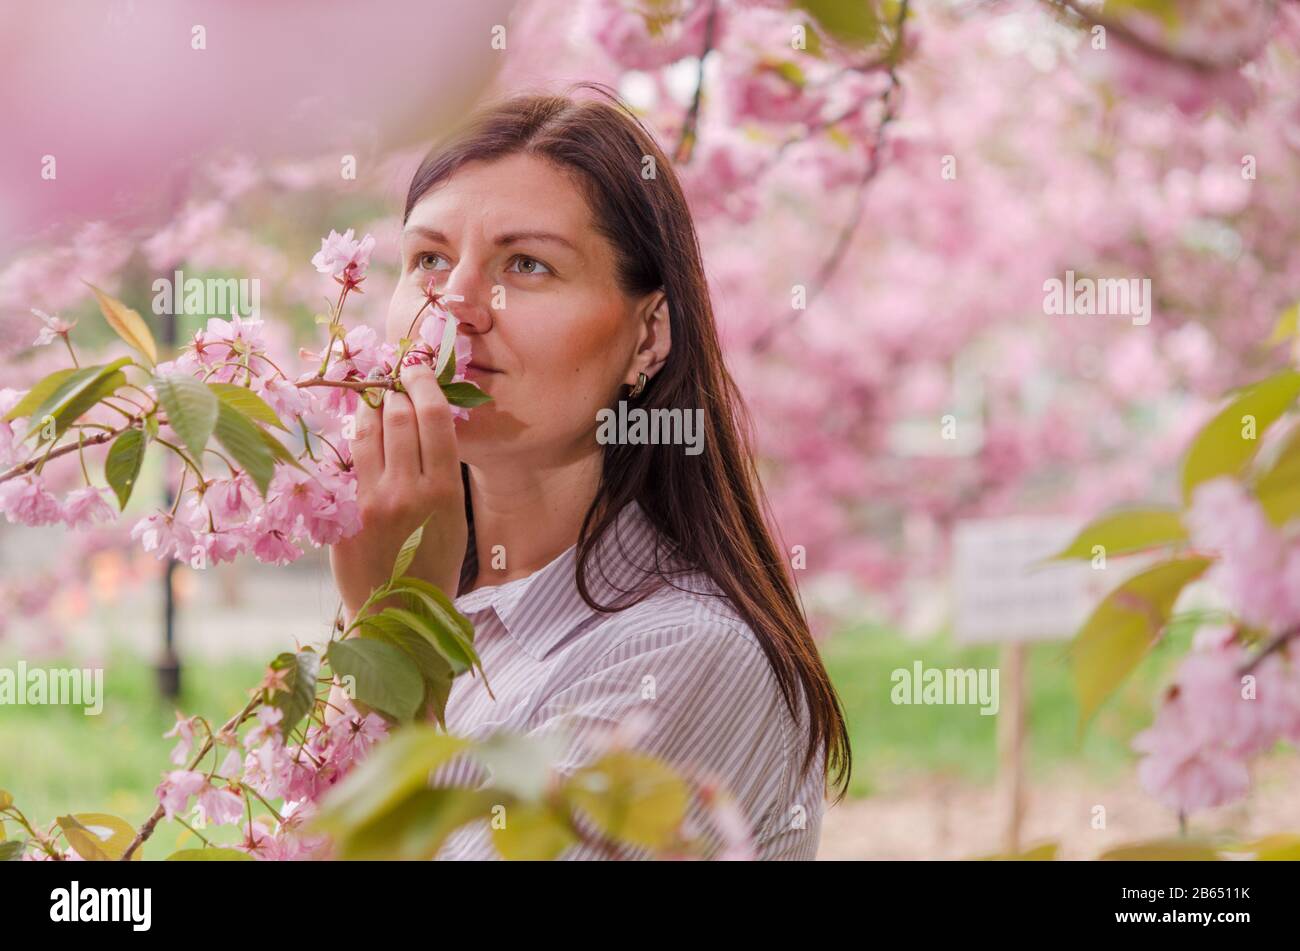 A young Caucasian girl enjoys the aroma and beauty of cherry blossoms. Cherry blossom in the city park of Dnipro Ukraine in Eastern Europe. Stock Photo